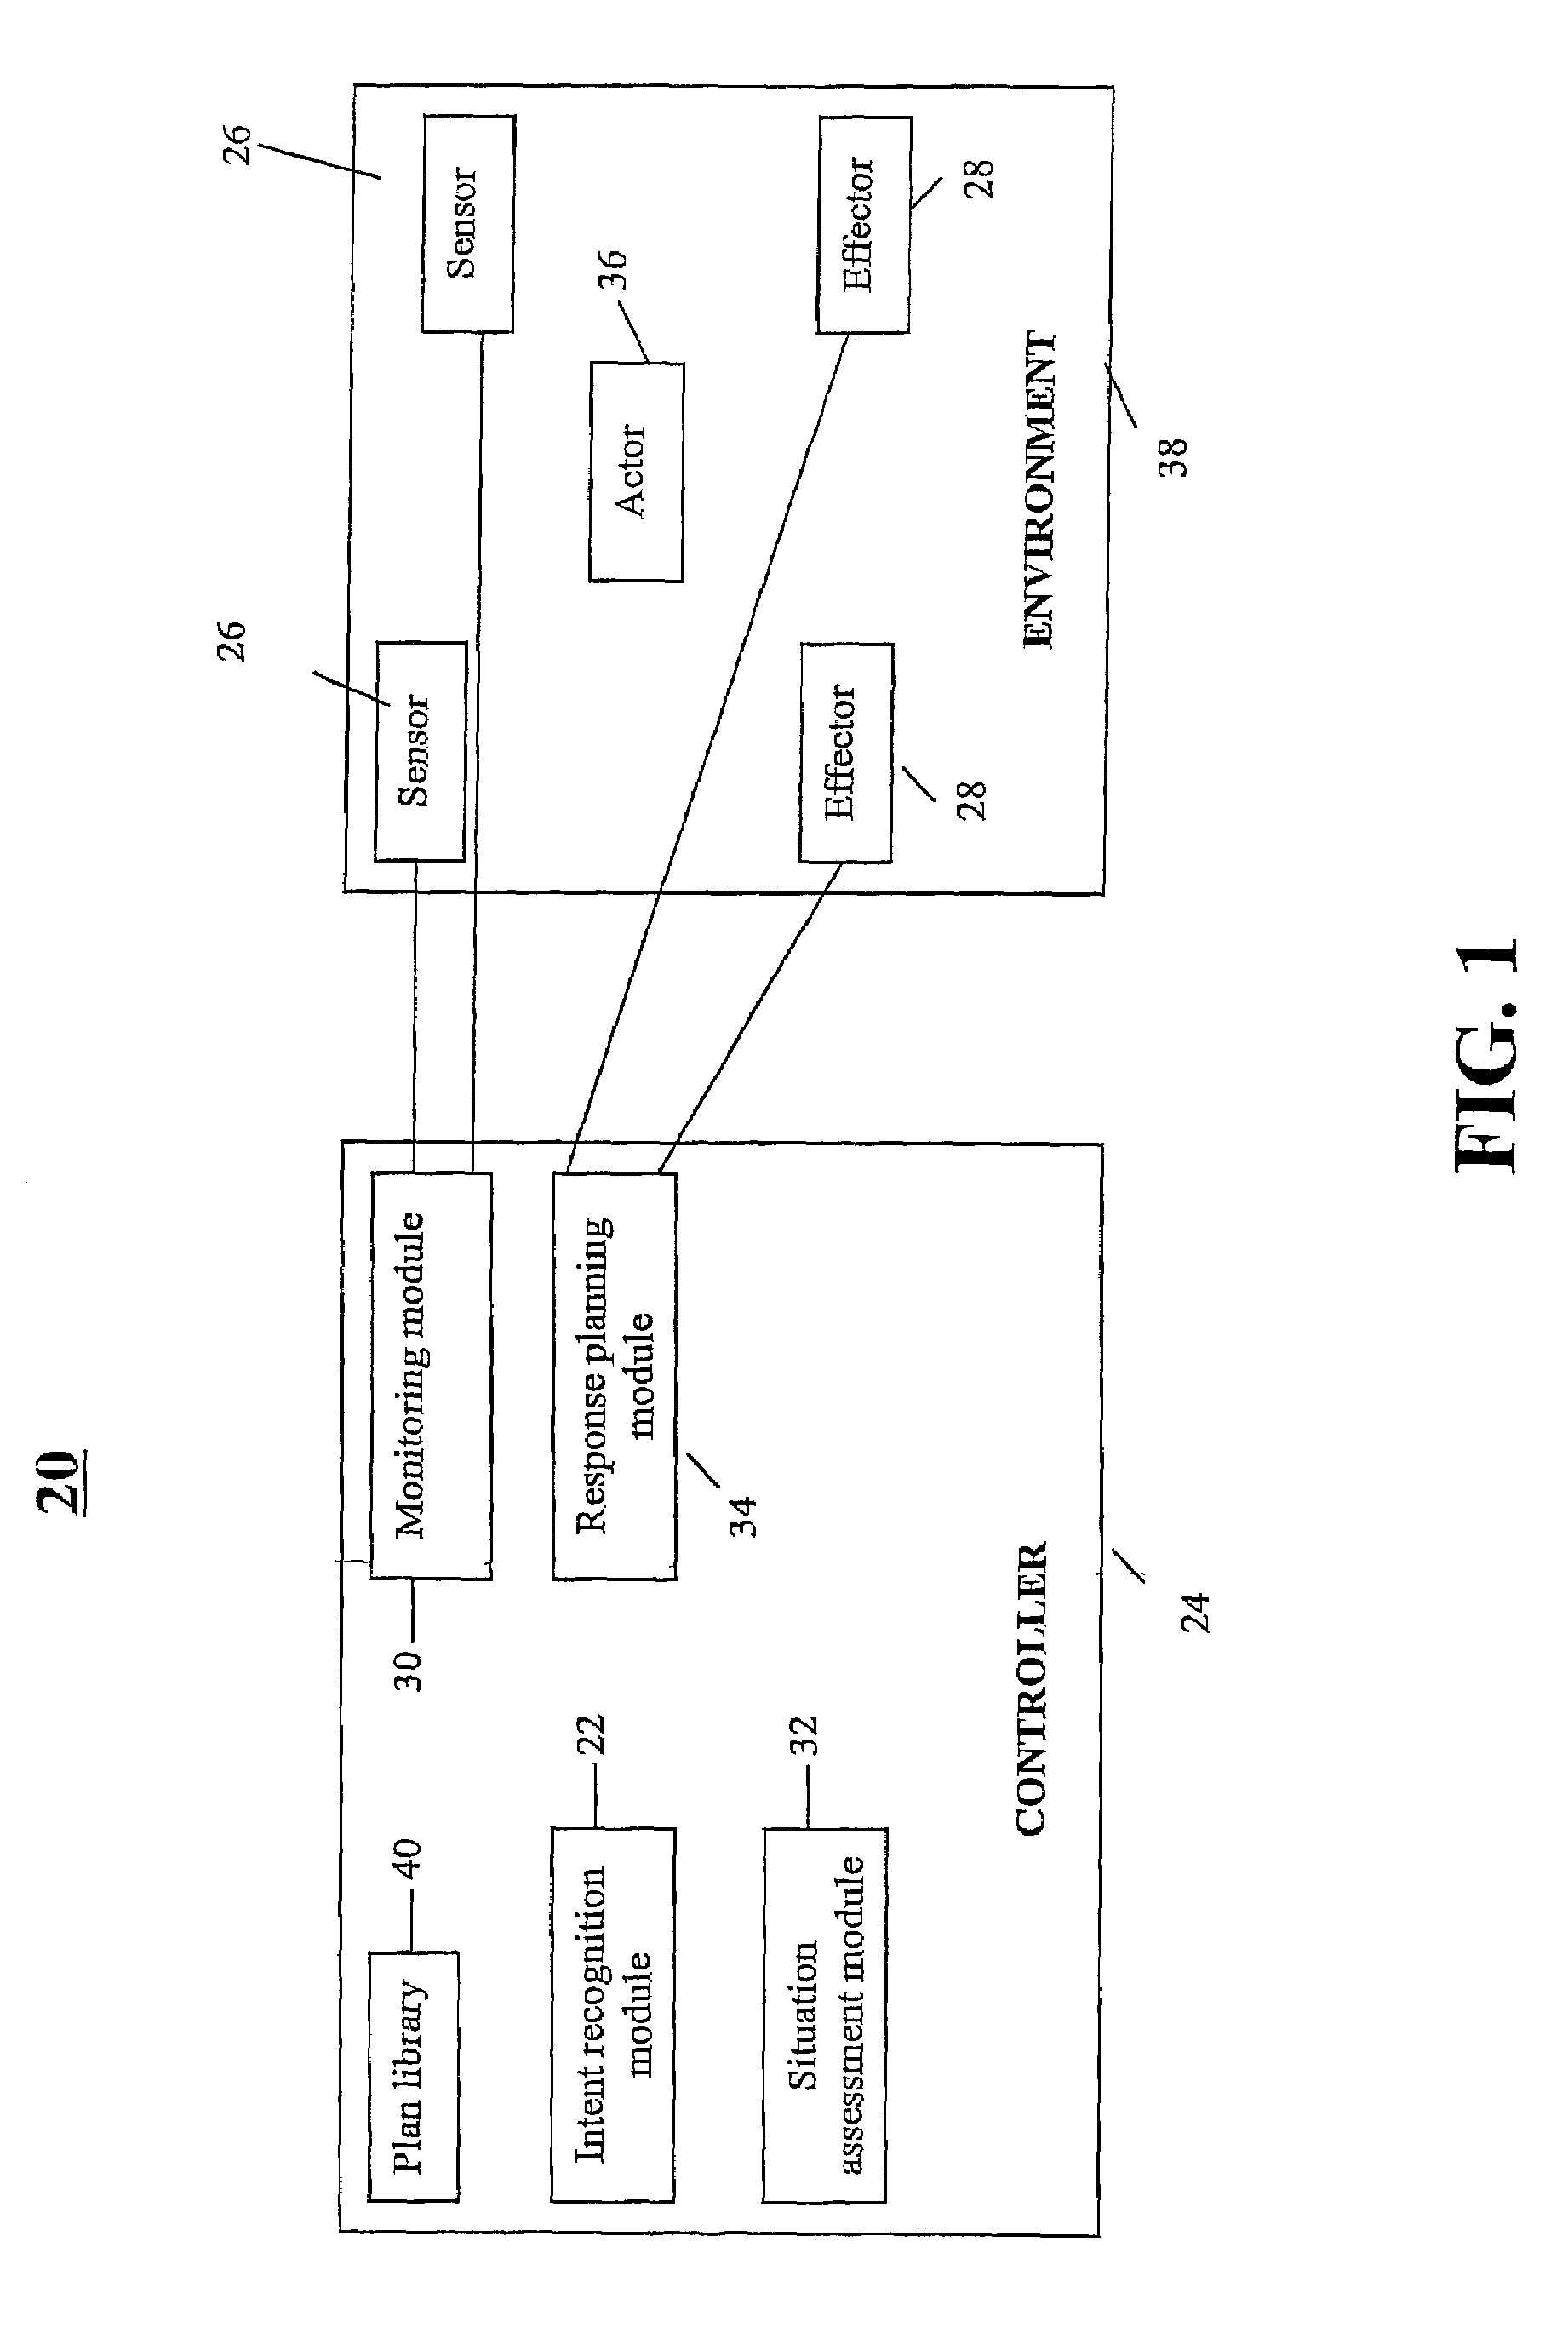 Probabilistic goal recognition system and method incorporating inferred unobserved actions